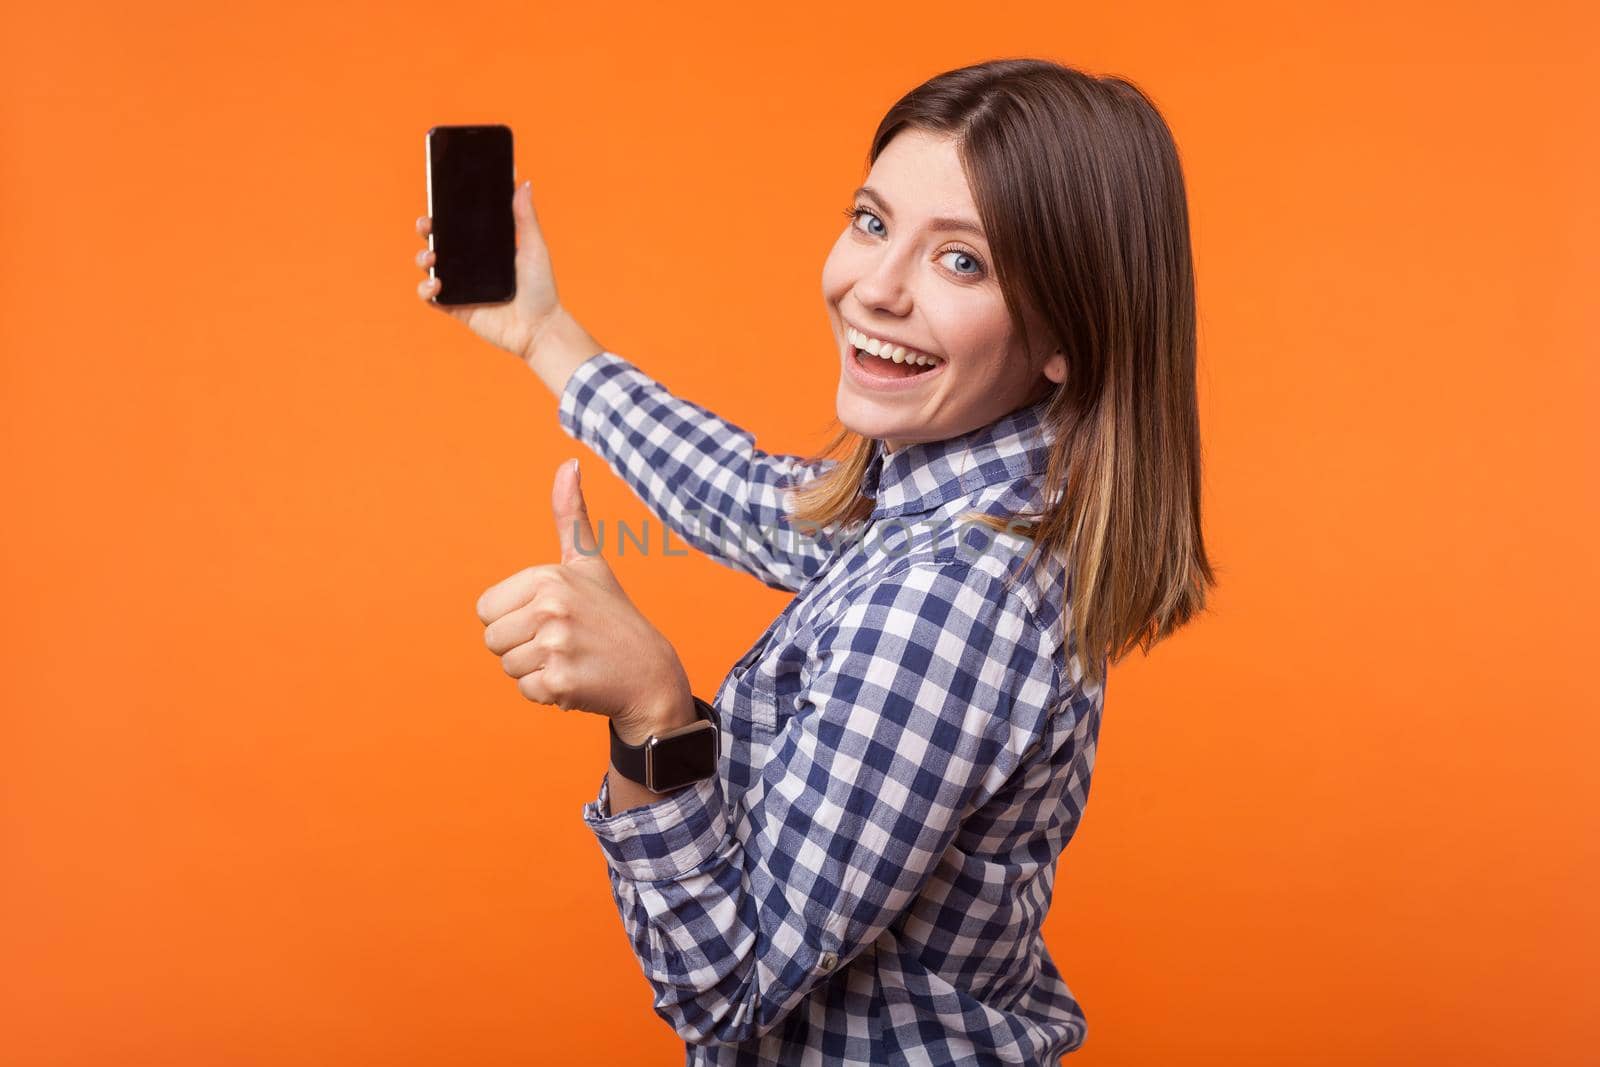 Half-turned portrait of brunette woman with charming smile in checkered shirt holding phone and showing thumbs up, satisfied with mobile services. indoor studio shot isolated on orange background